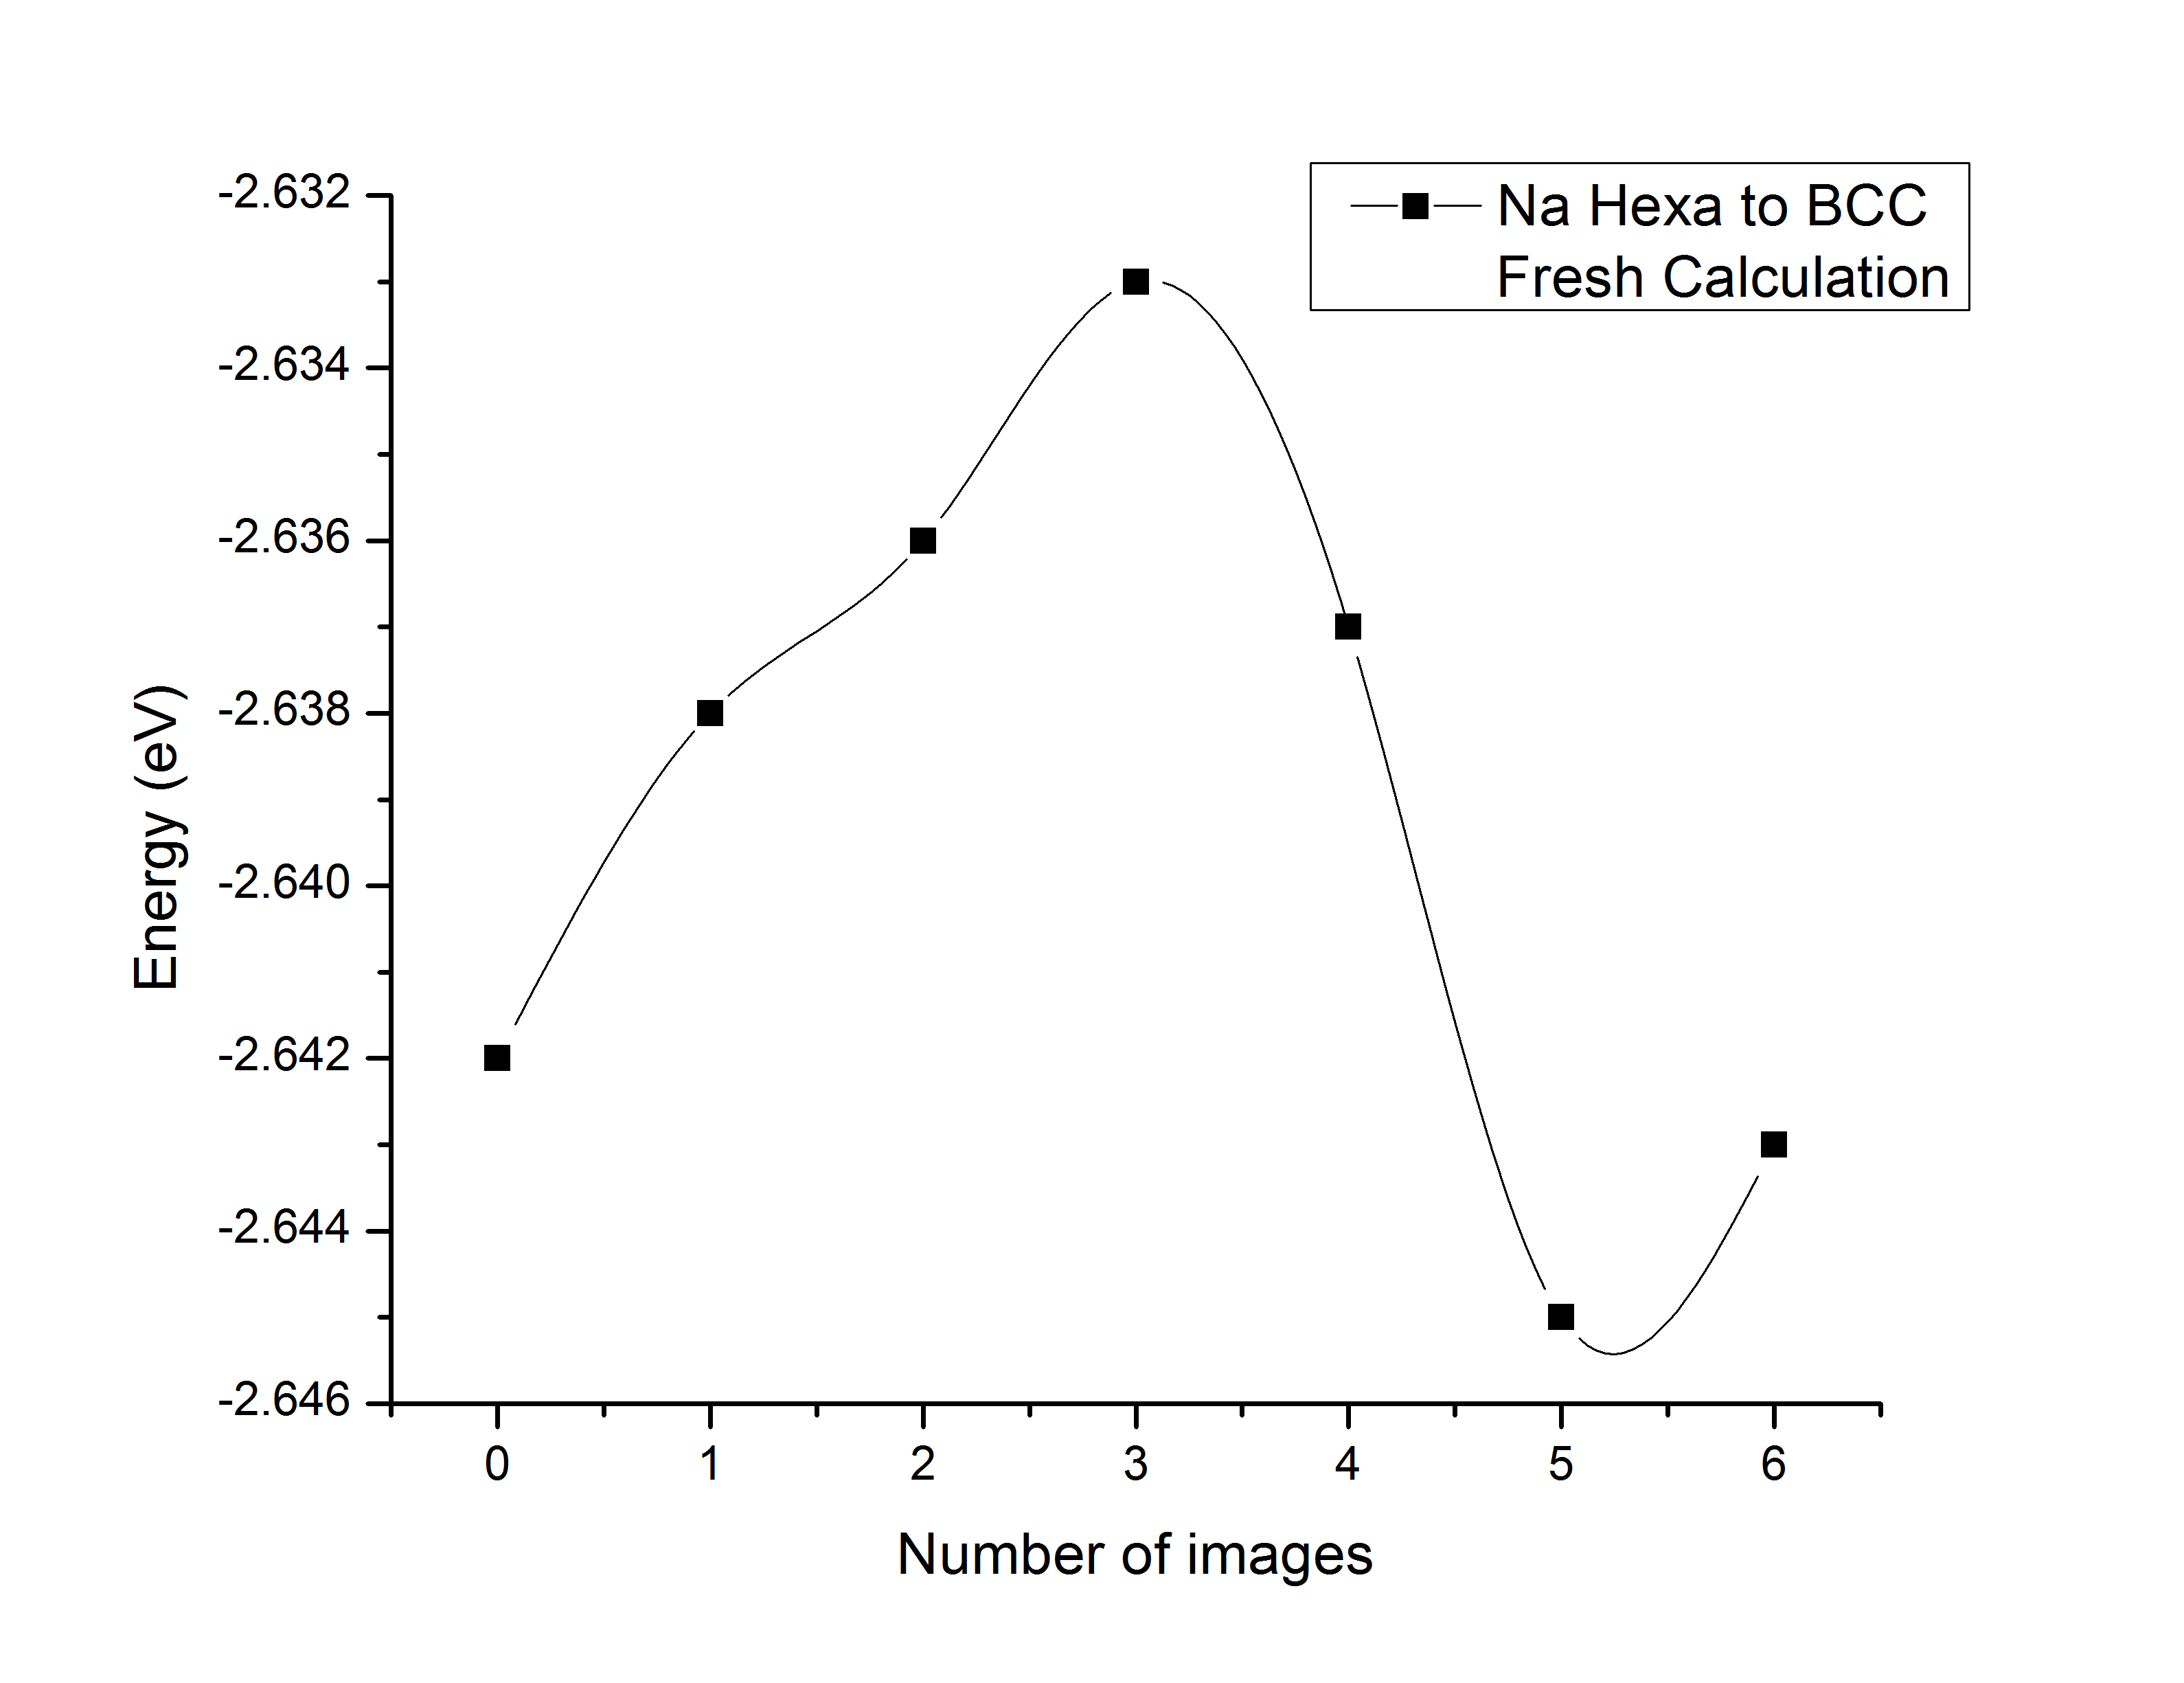 Graph when images 5 having less energy than final image